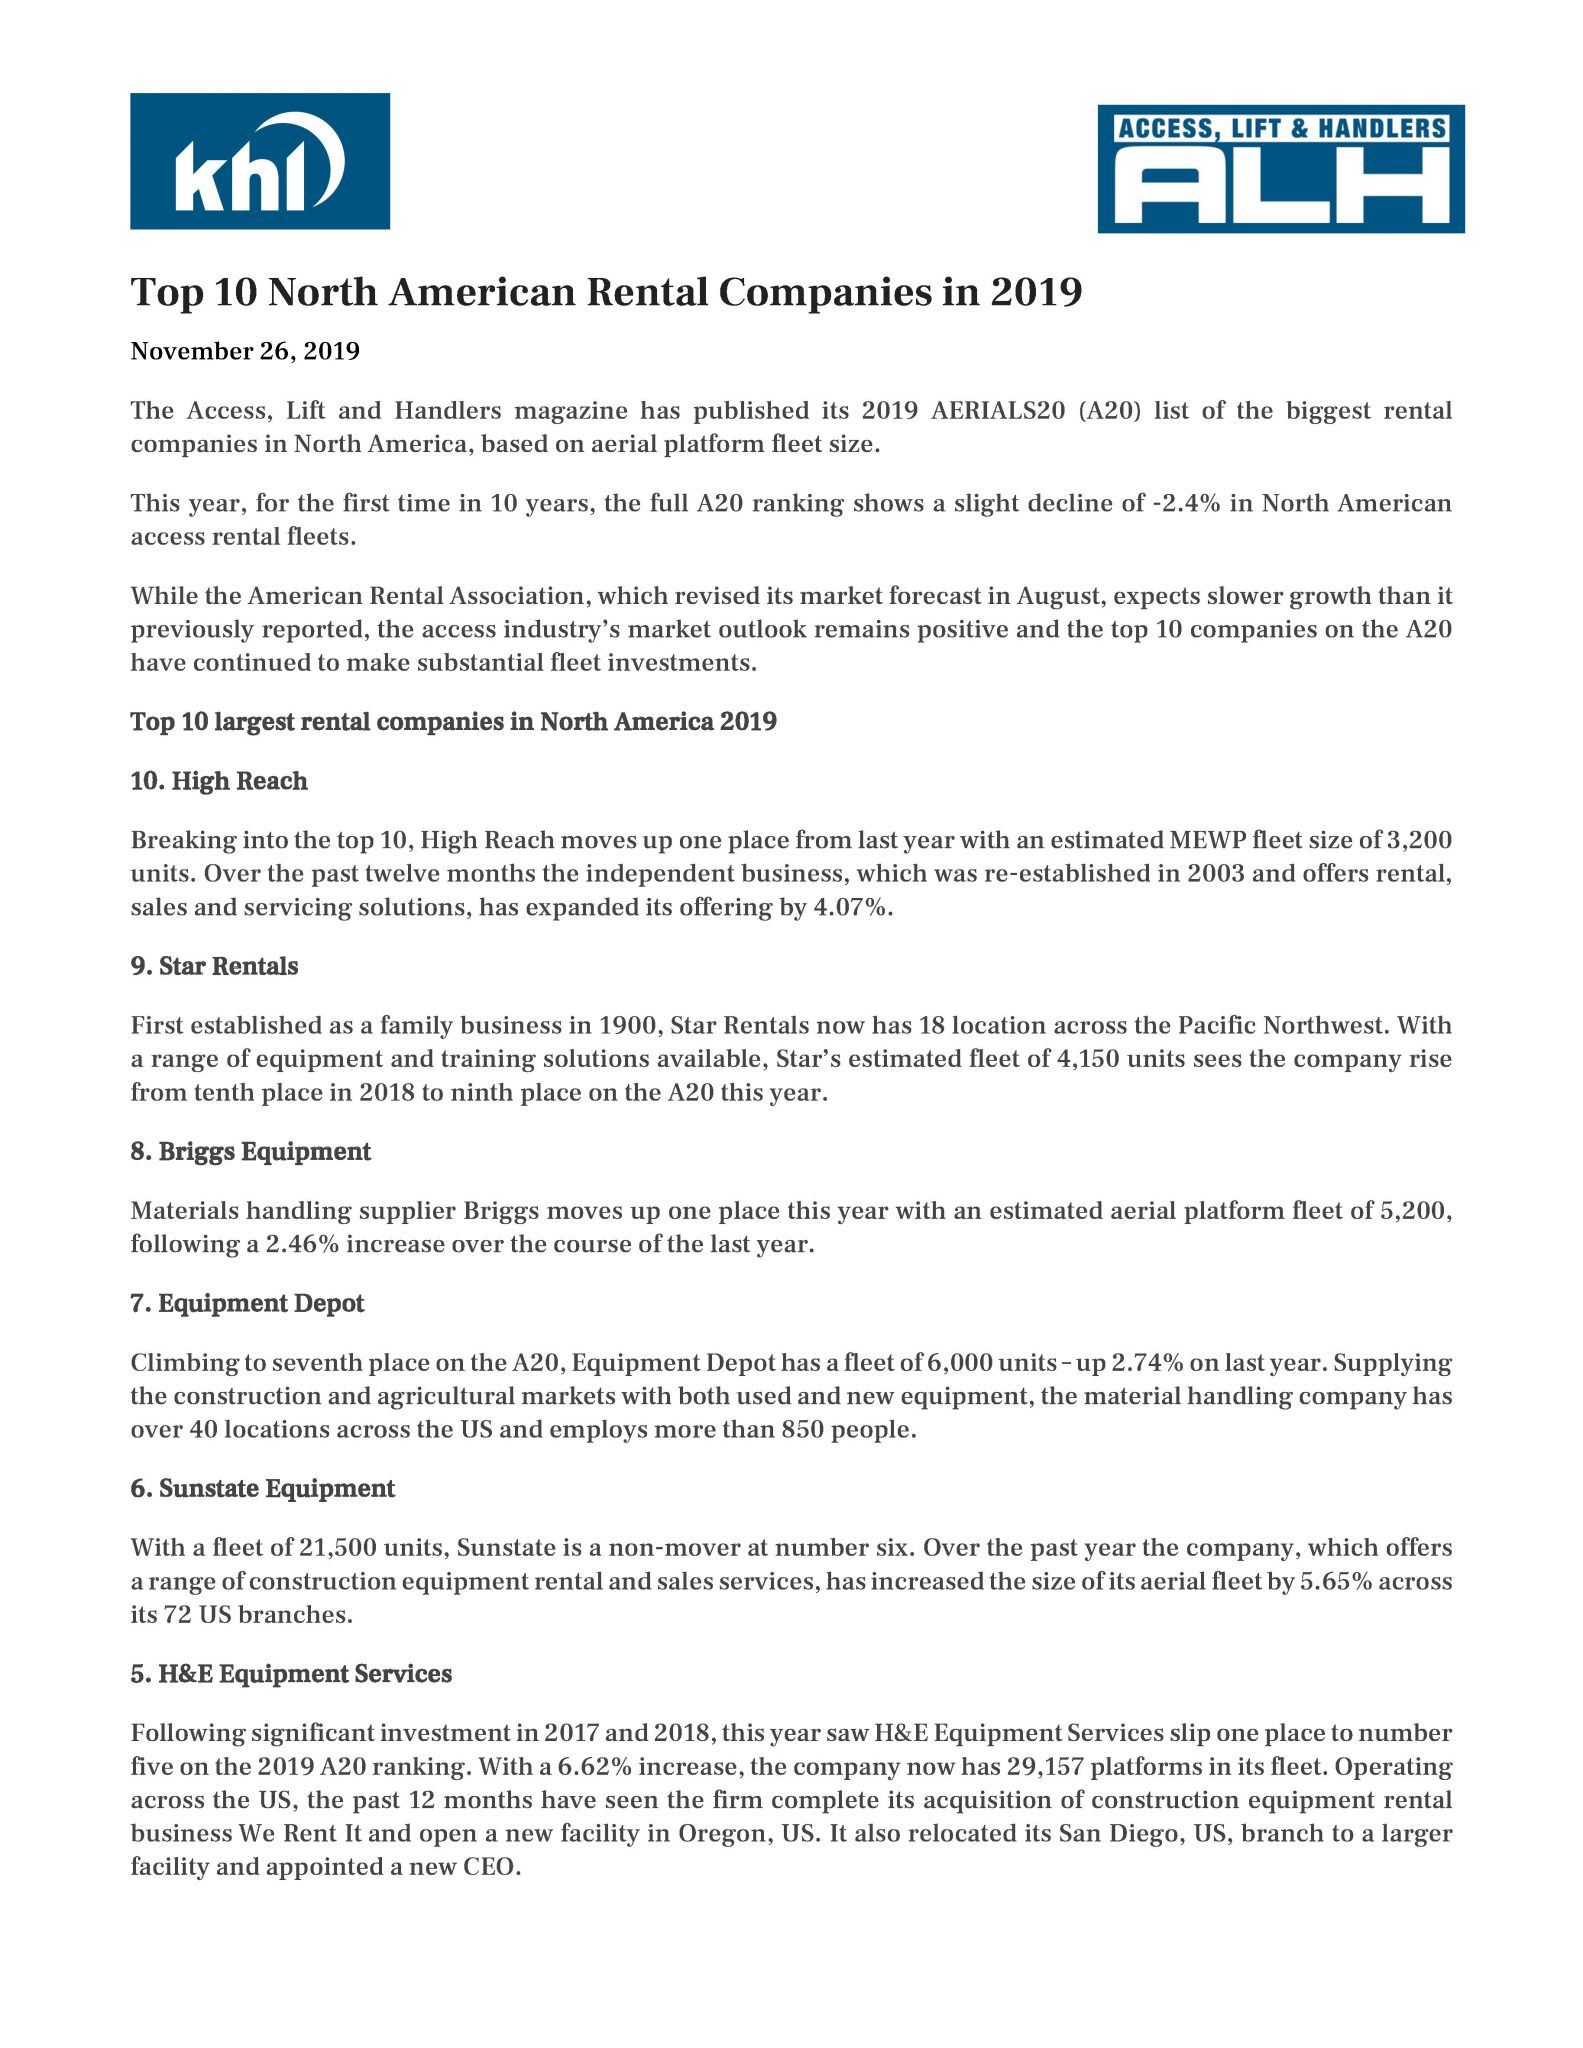 Top 10 North American Rental Companies in 2019 11.26.19_Page_1_Page_1